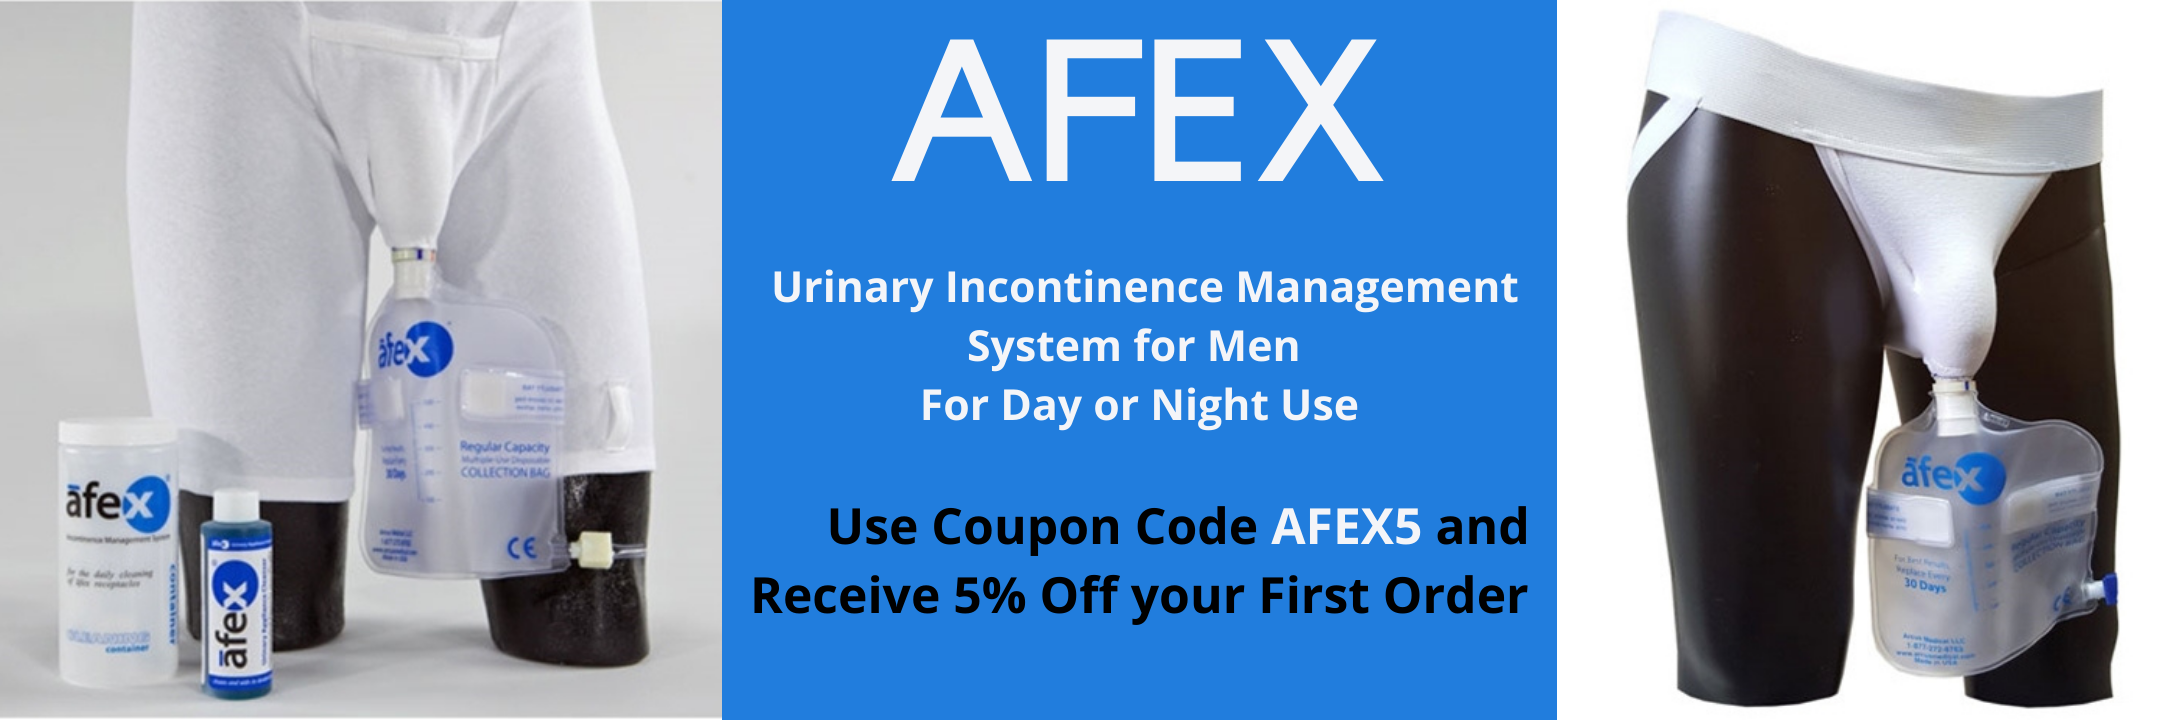 Afex Incontinence System for Men